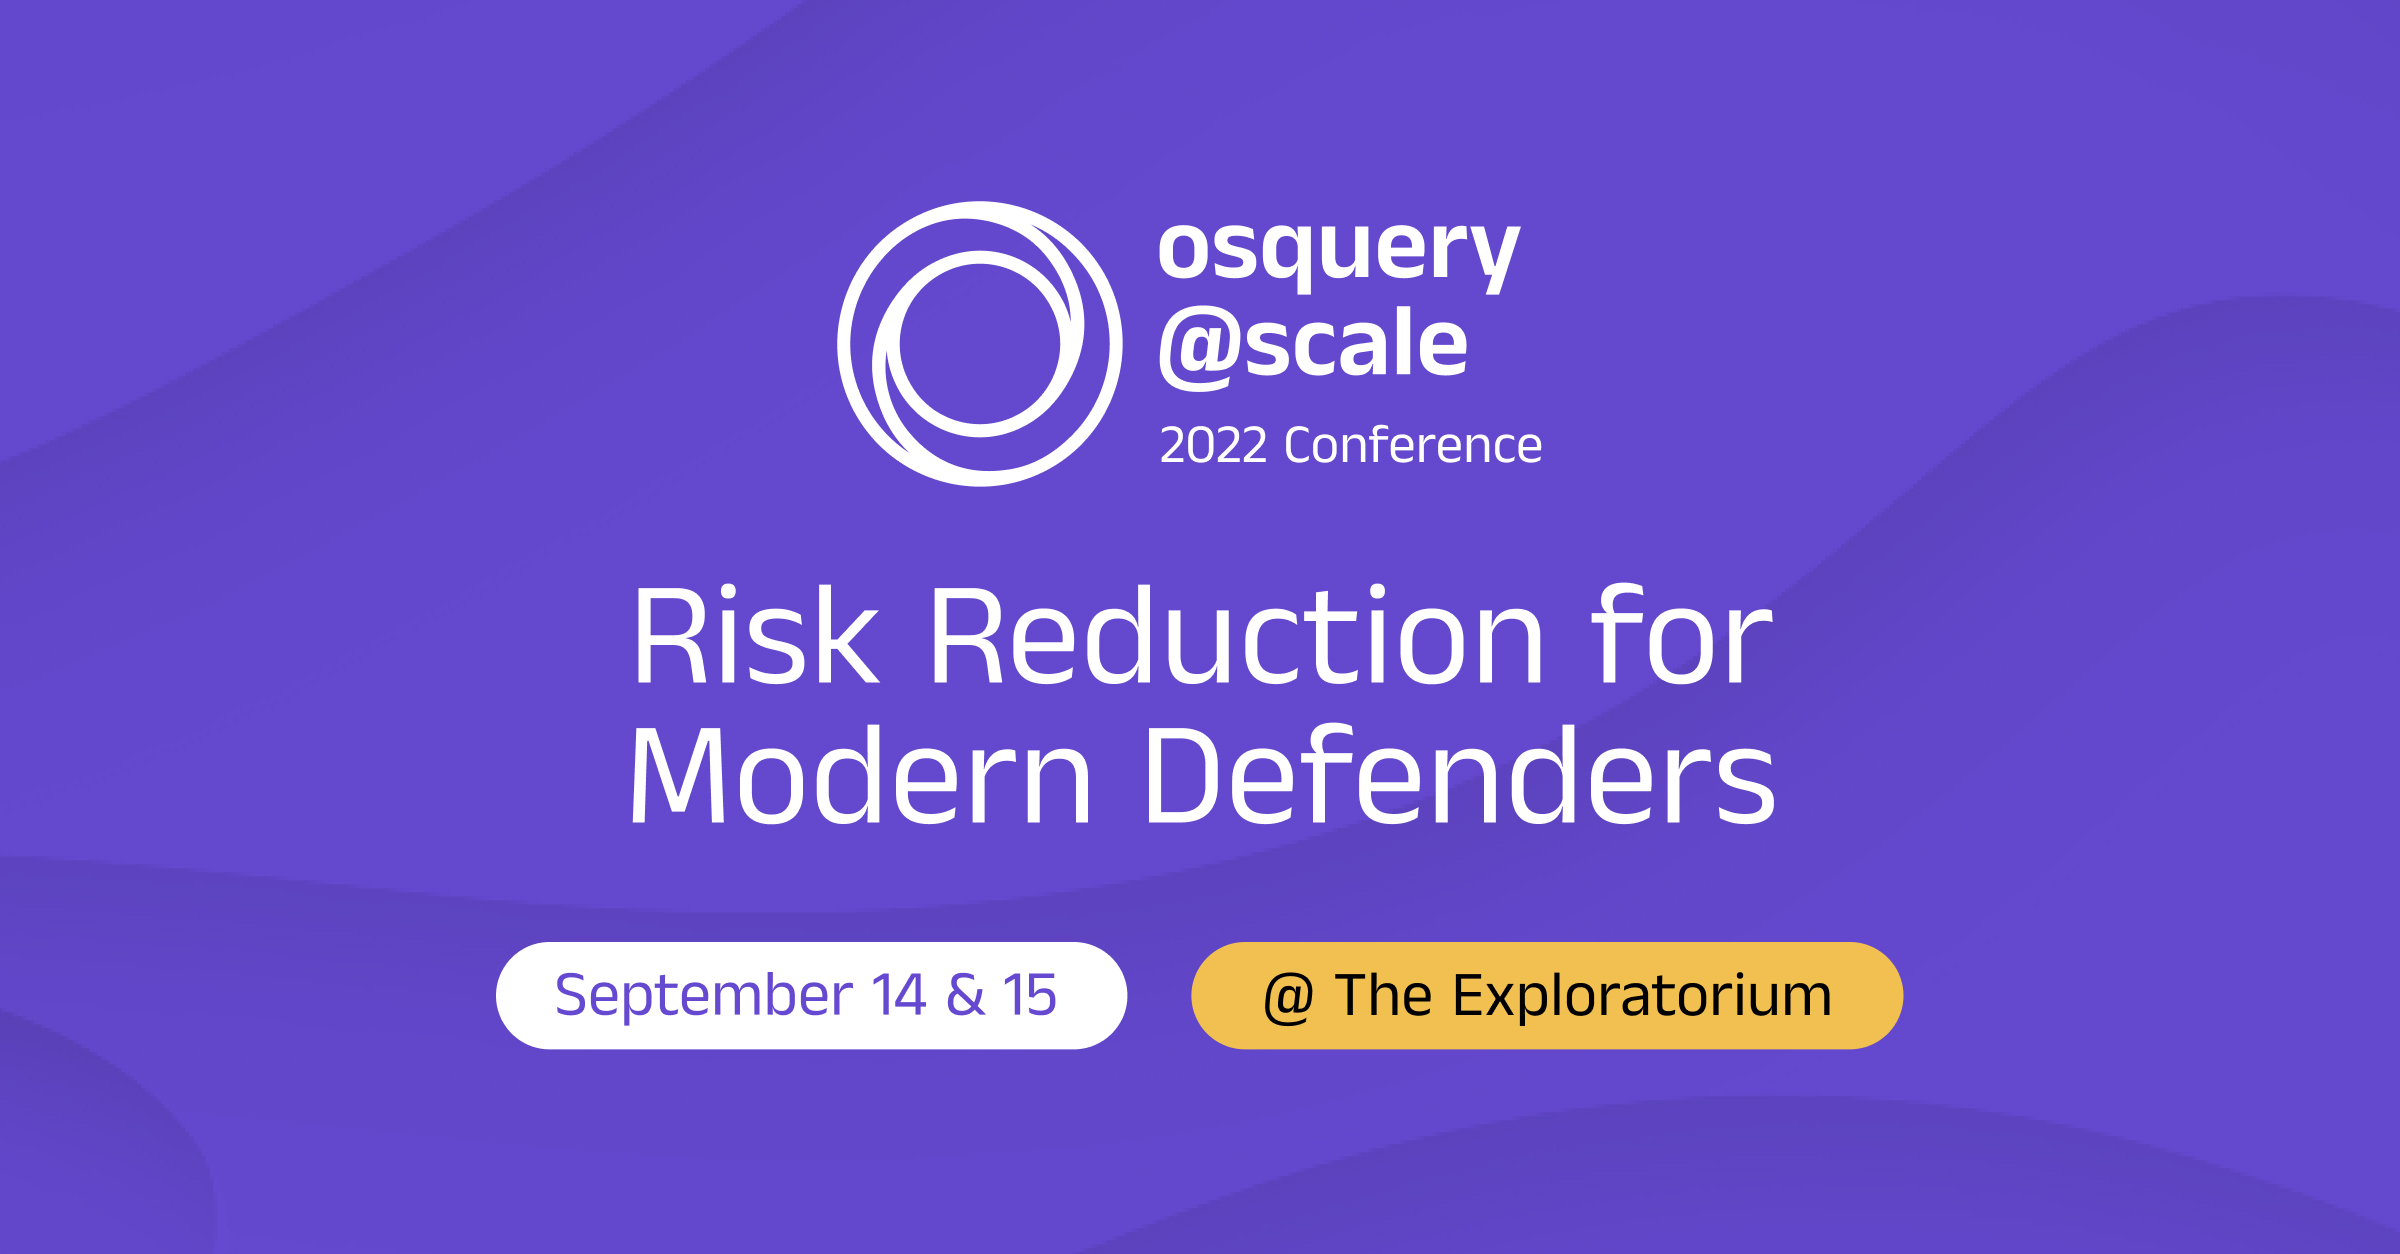 The Best of Osquery@scale: Monitoring & Compliance